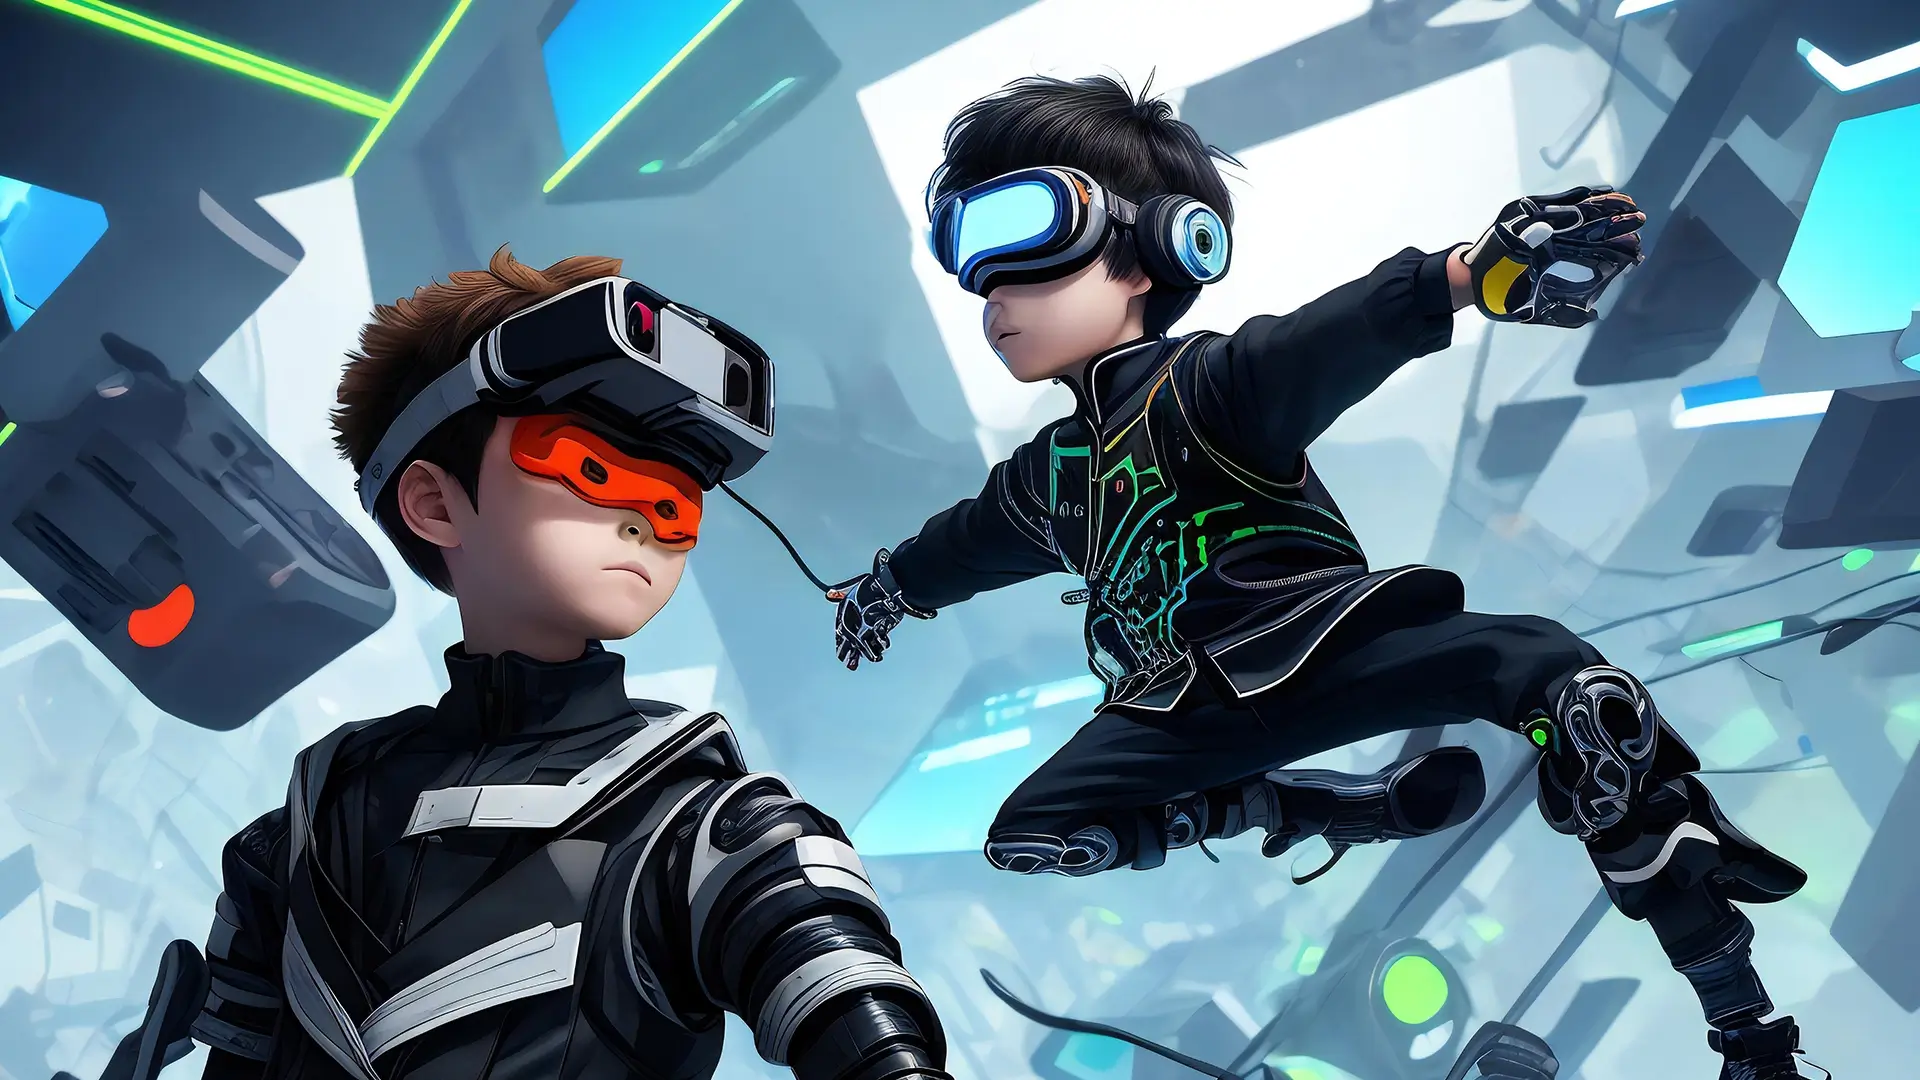 Illustration of two futuristic human game characters wearing VR headsets and sci-fi gear.